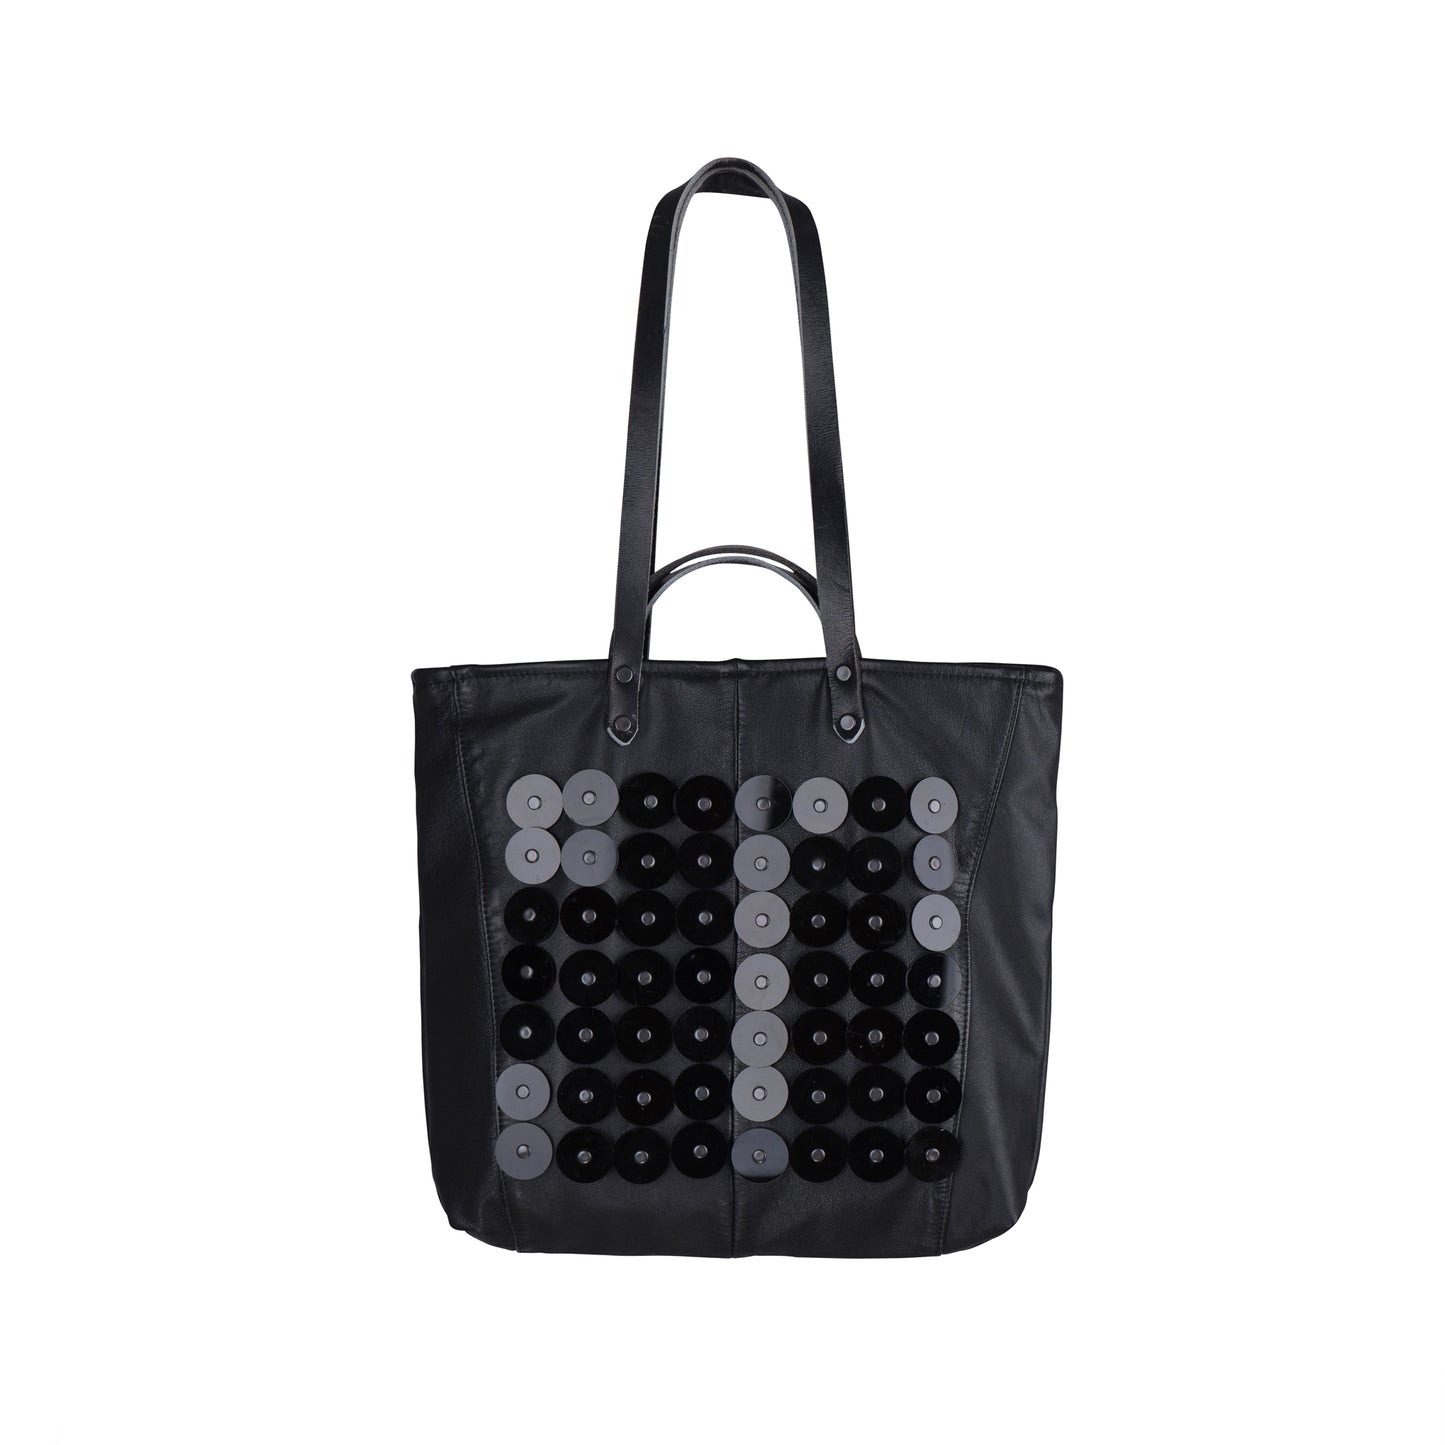 METANoIA black recycled leather medium handbag with black circle acrylic forms fashioned into a repeative fashion with a smaller circle overlay on each form. 